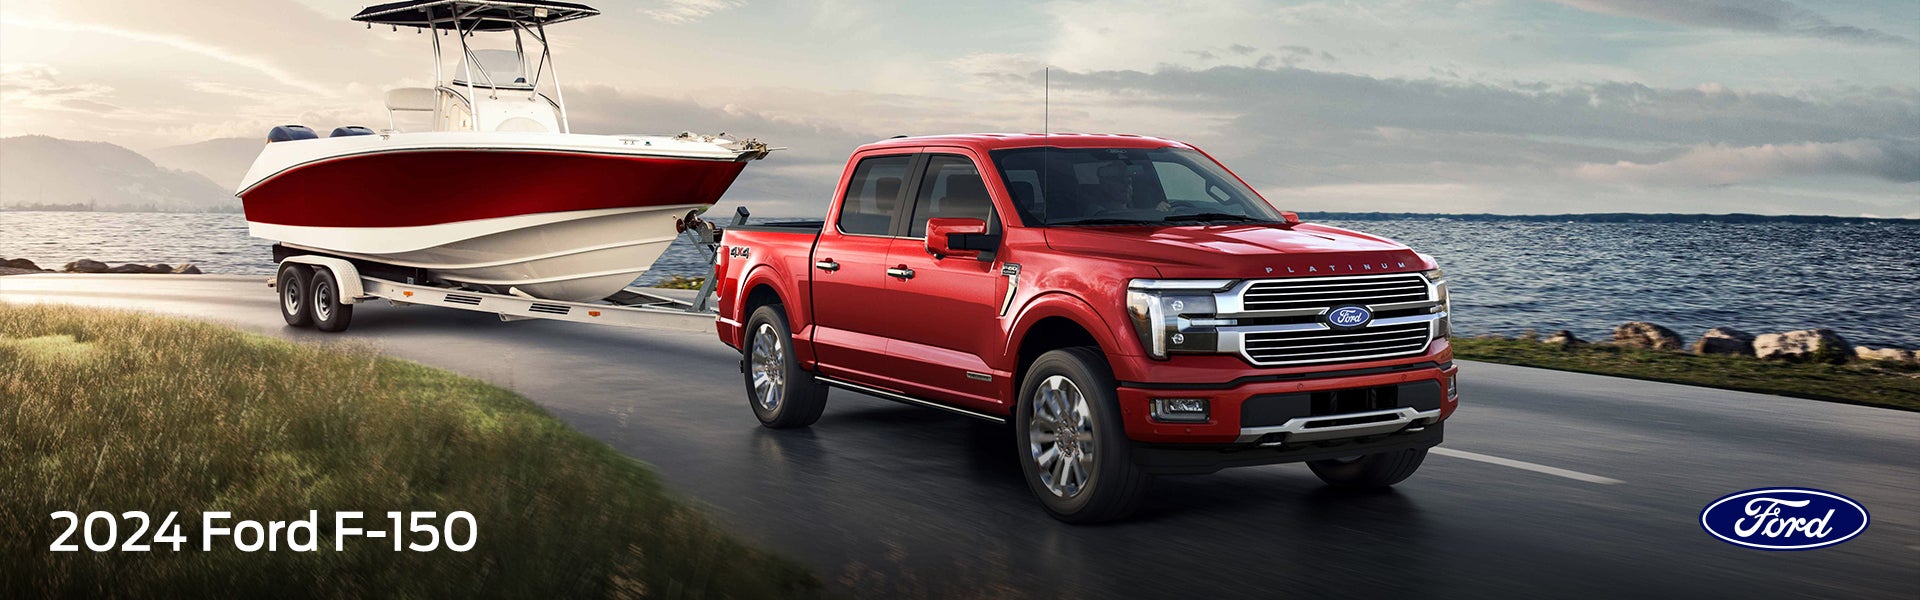 2023 Ford F-150 Available at Coughlin Ford of Circleville